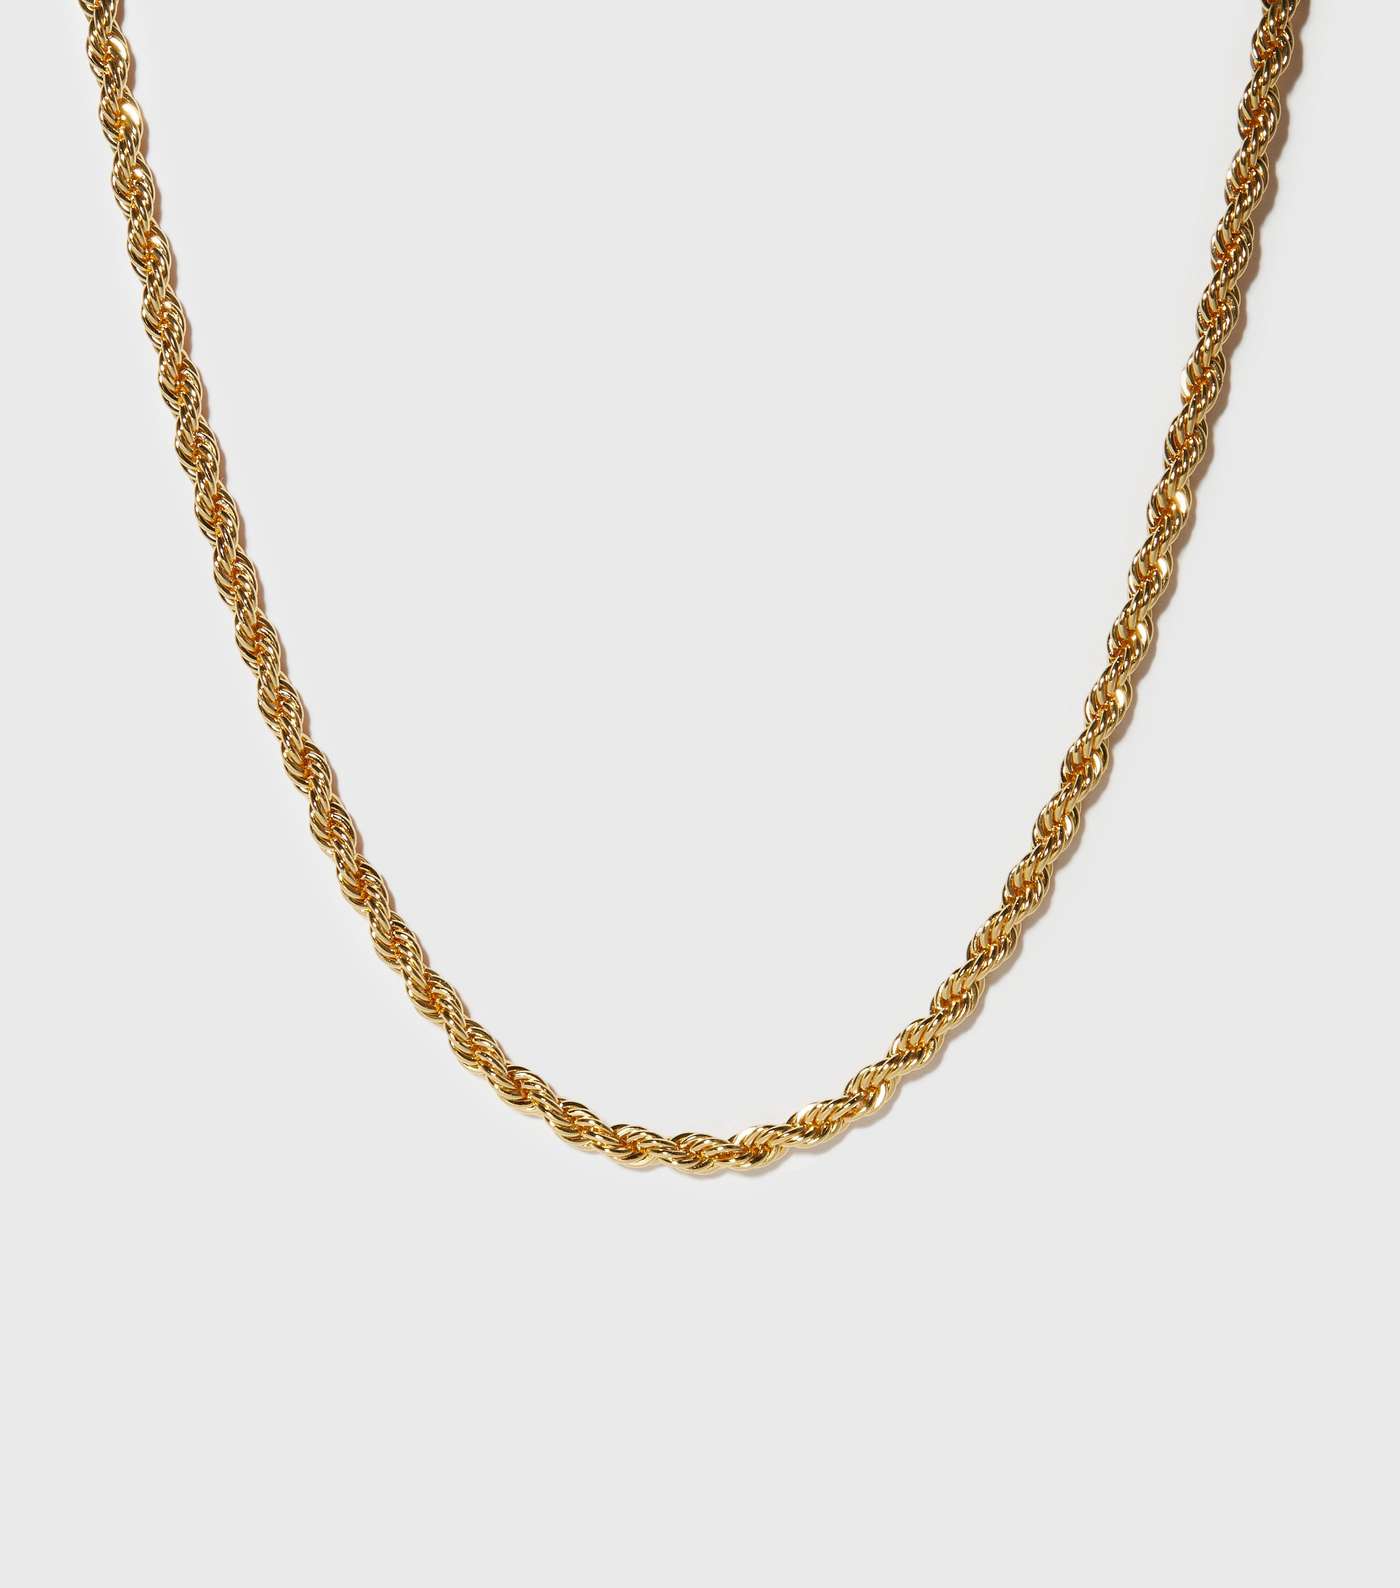 Real Gold Plated Rope Chain Necklace